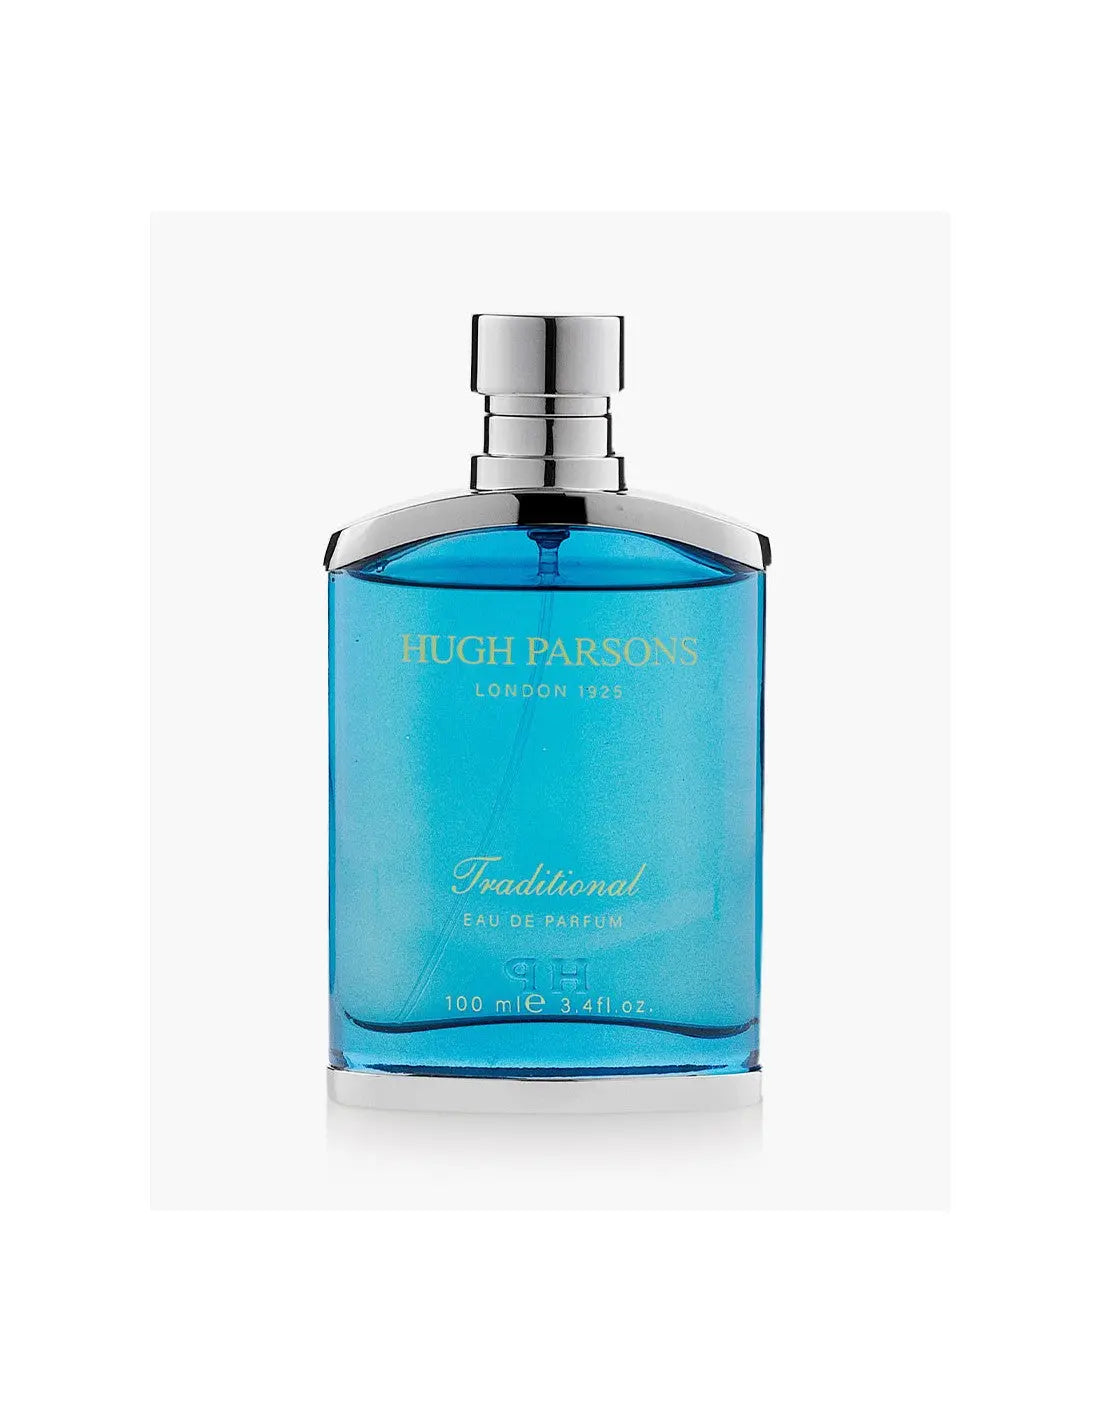 Hugh parsons Traditionell - 100 ml